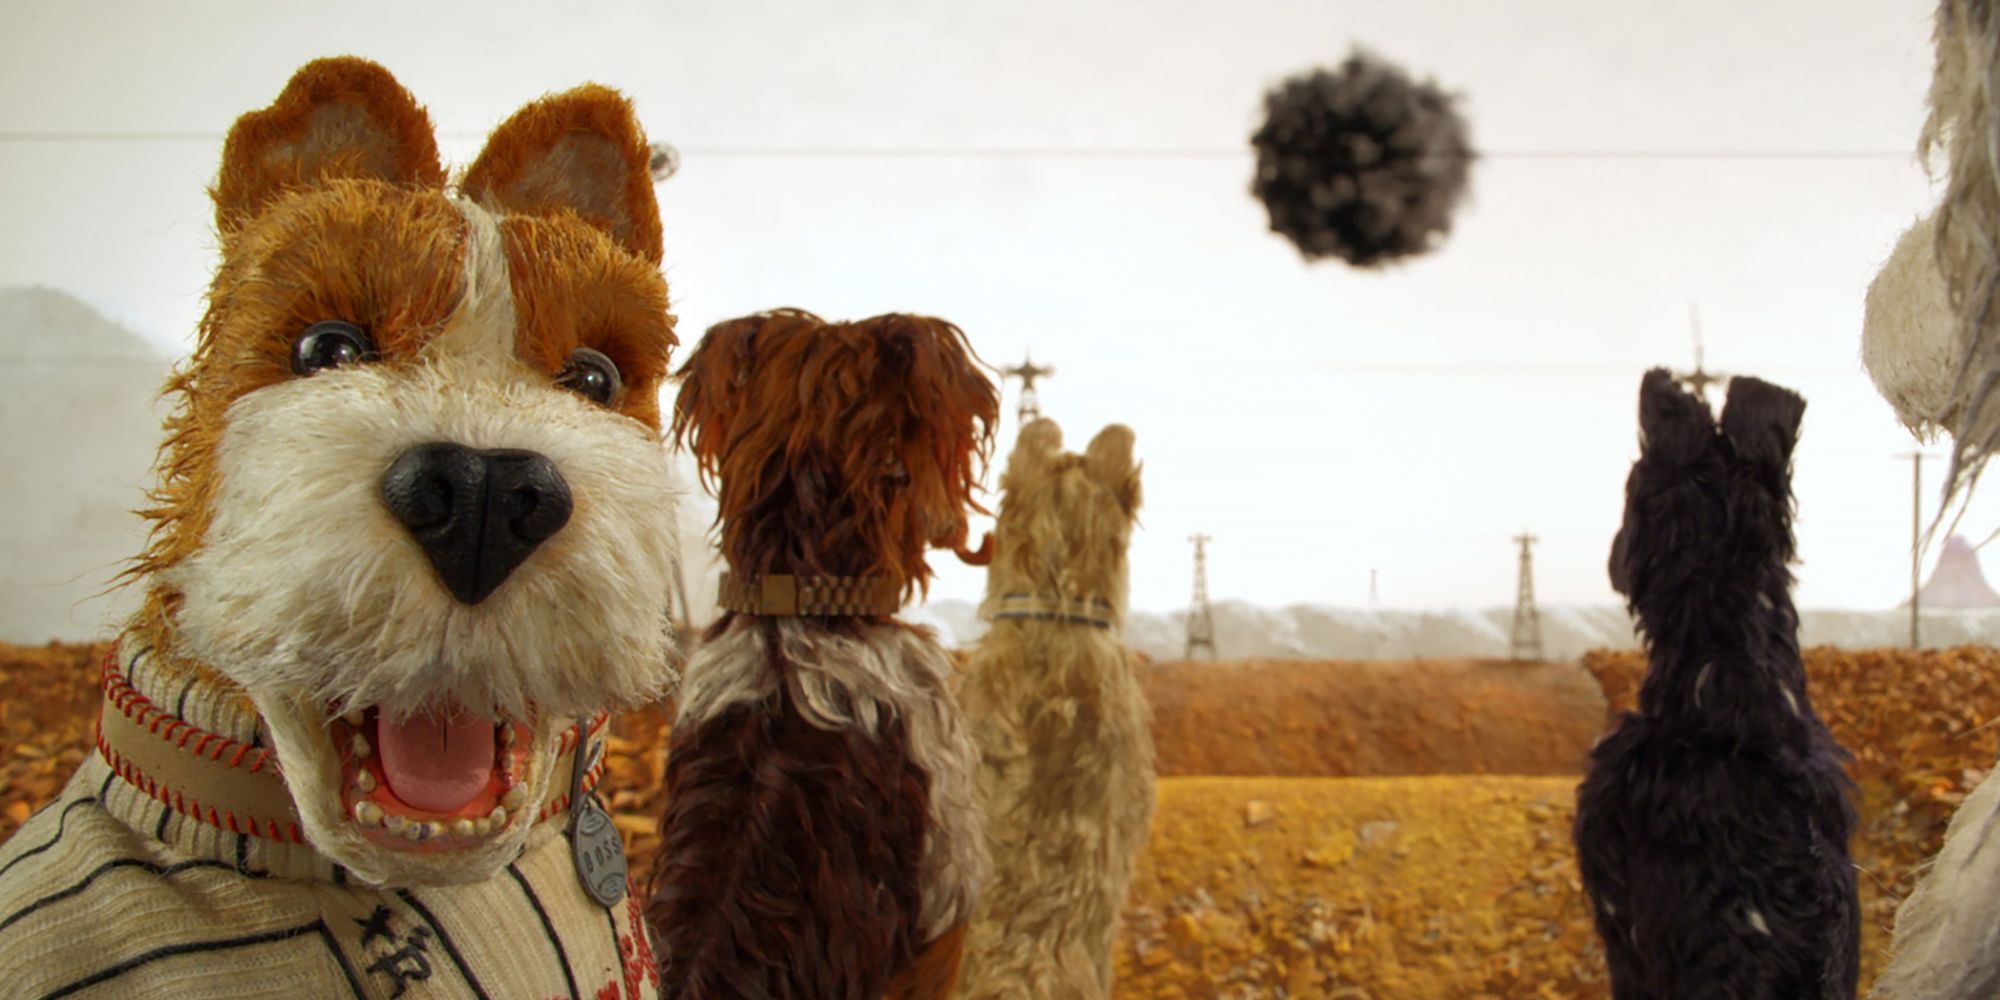 Isle of Dogs Review: Wes Anderson’s Latest is A Heartwarming Tale